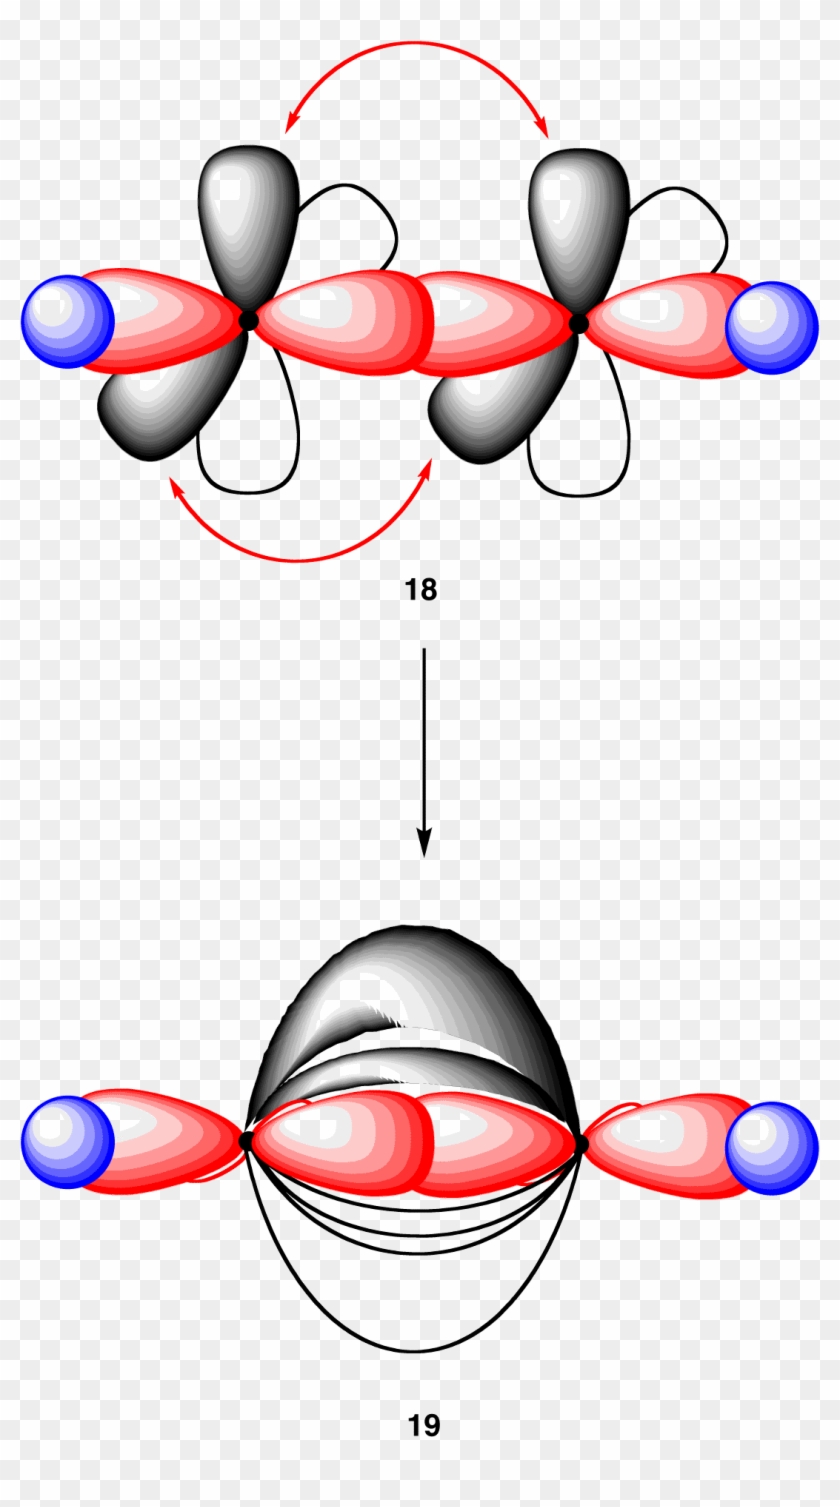 Hydrogen valence electrons atoms